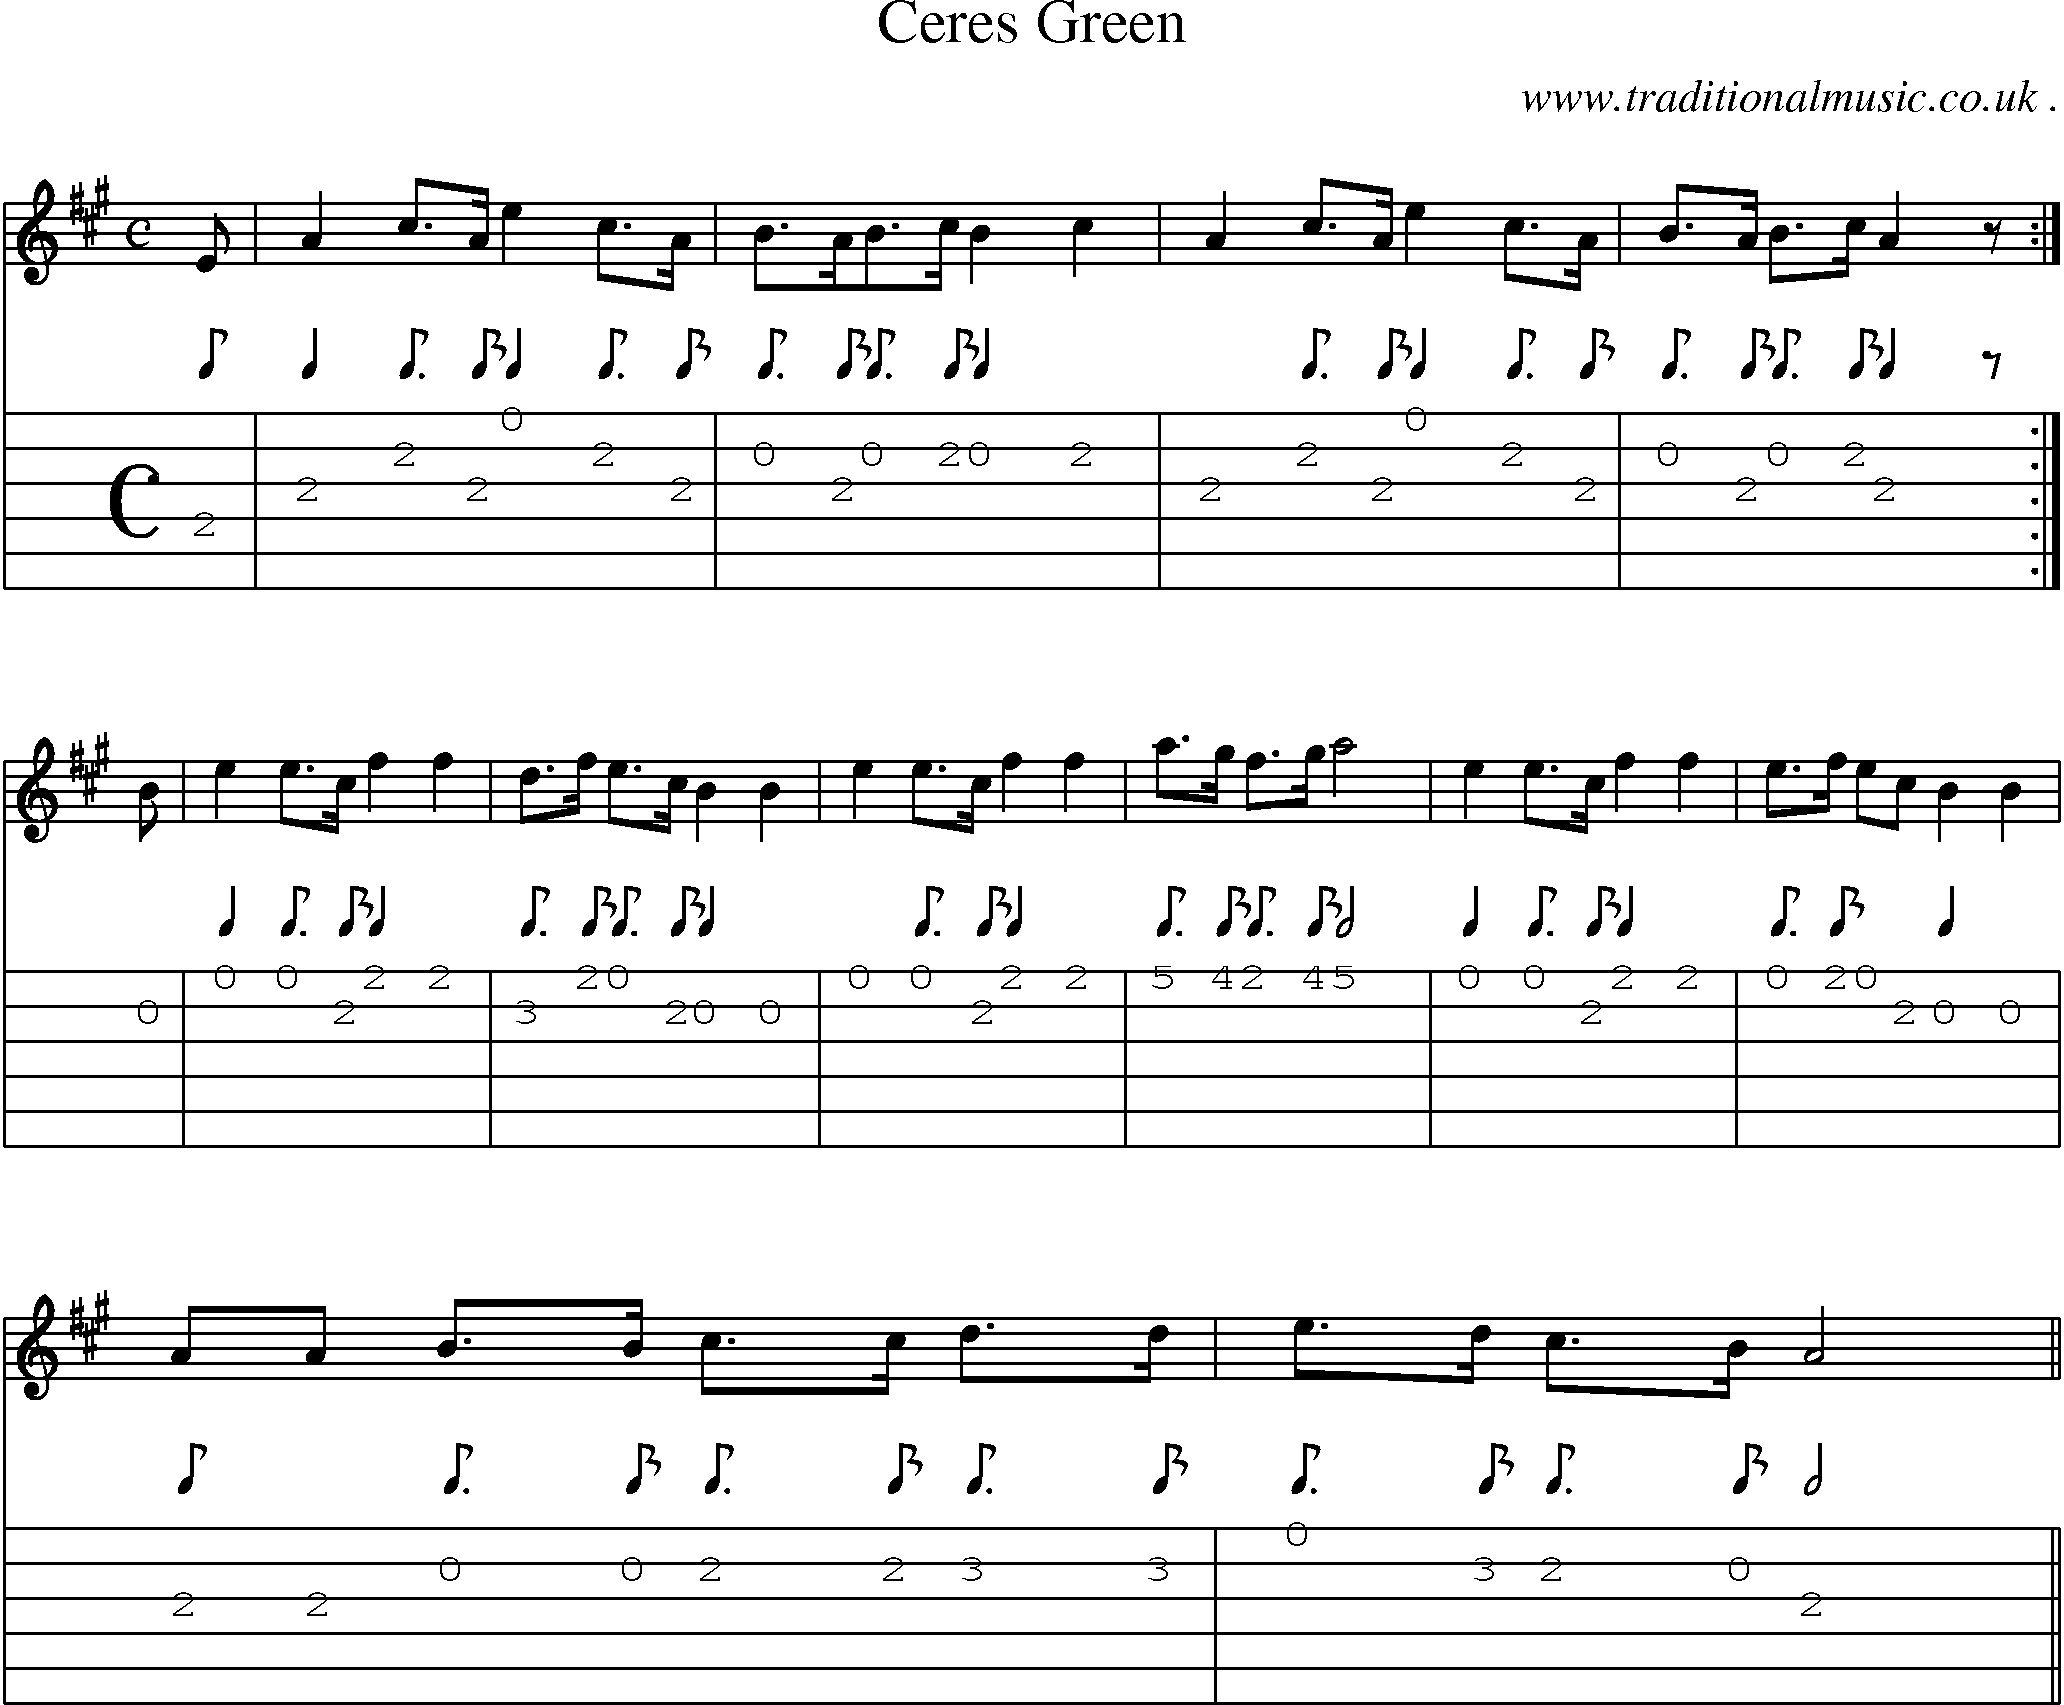 Sheet-music  score, Chords and Guitar Tabs for Ceres Green